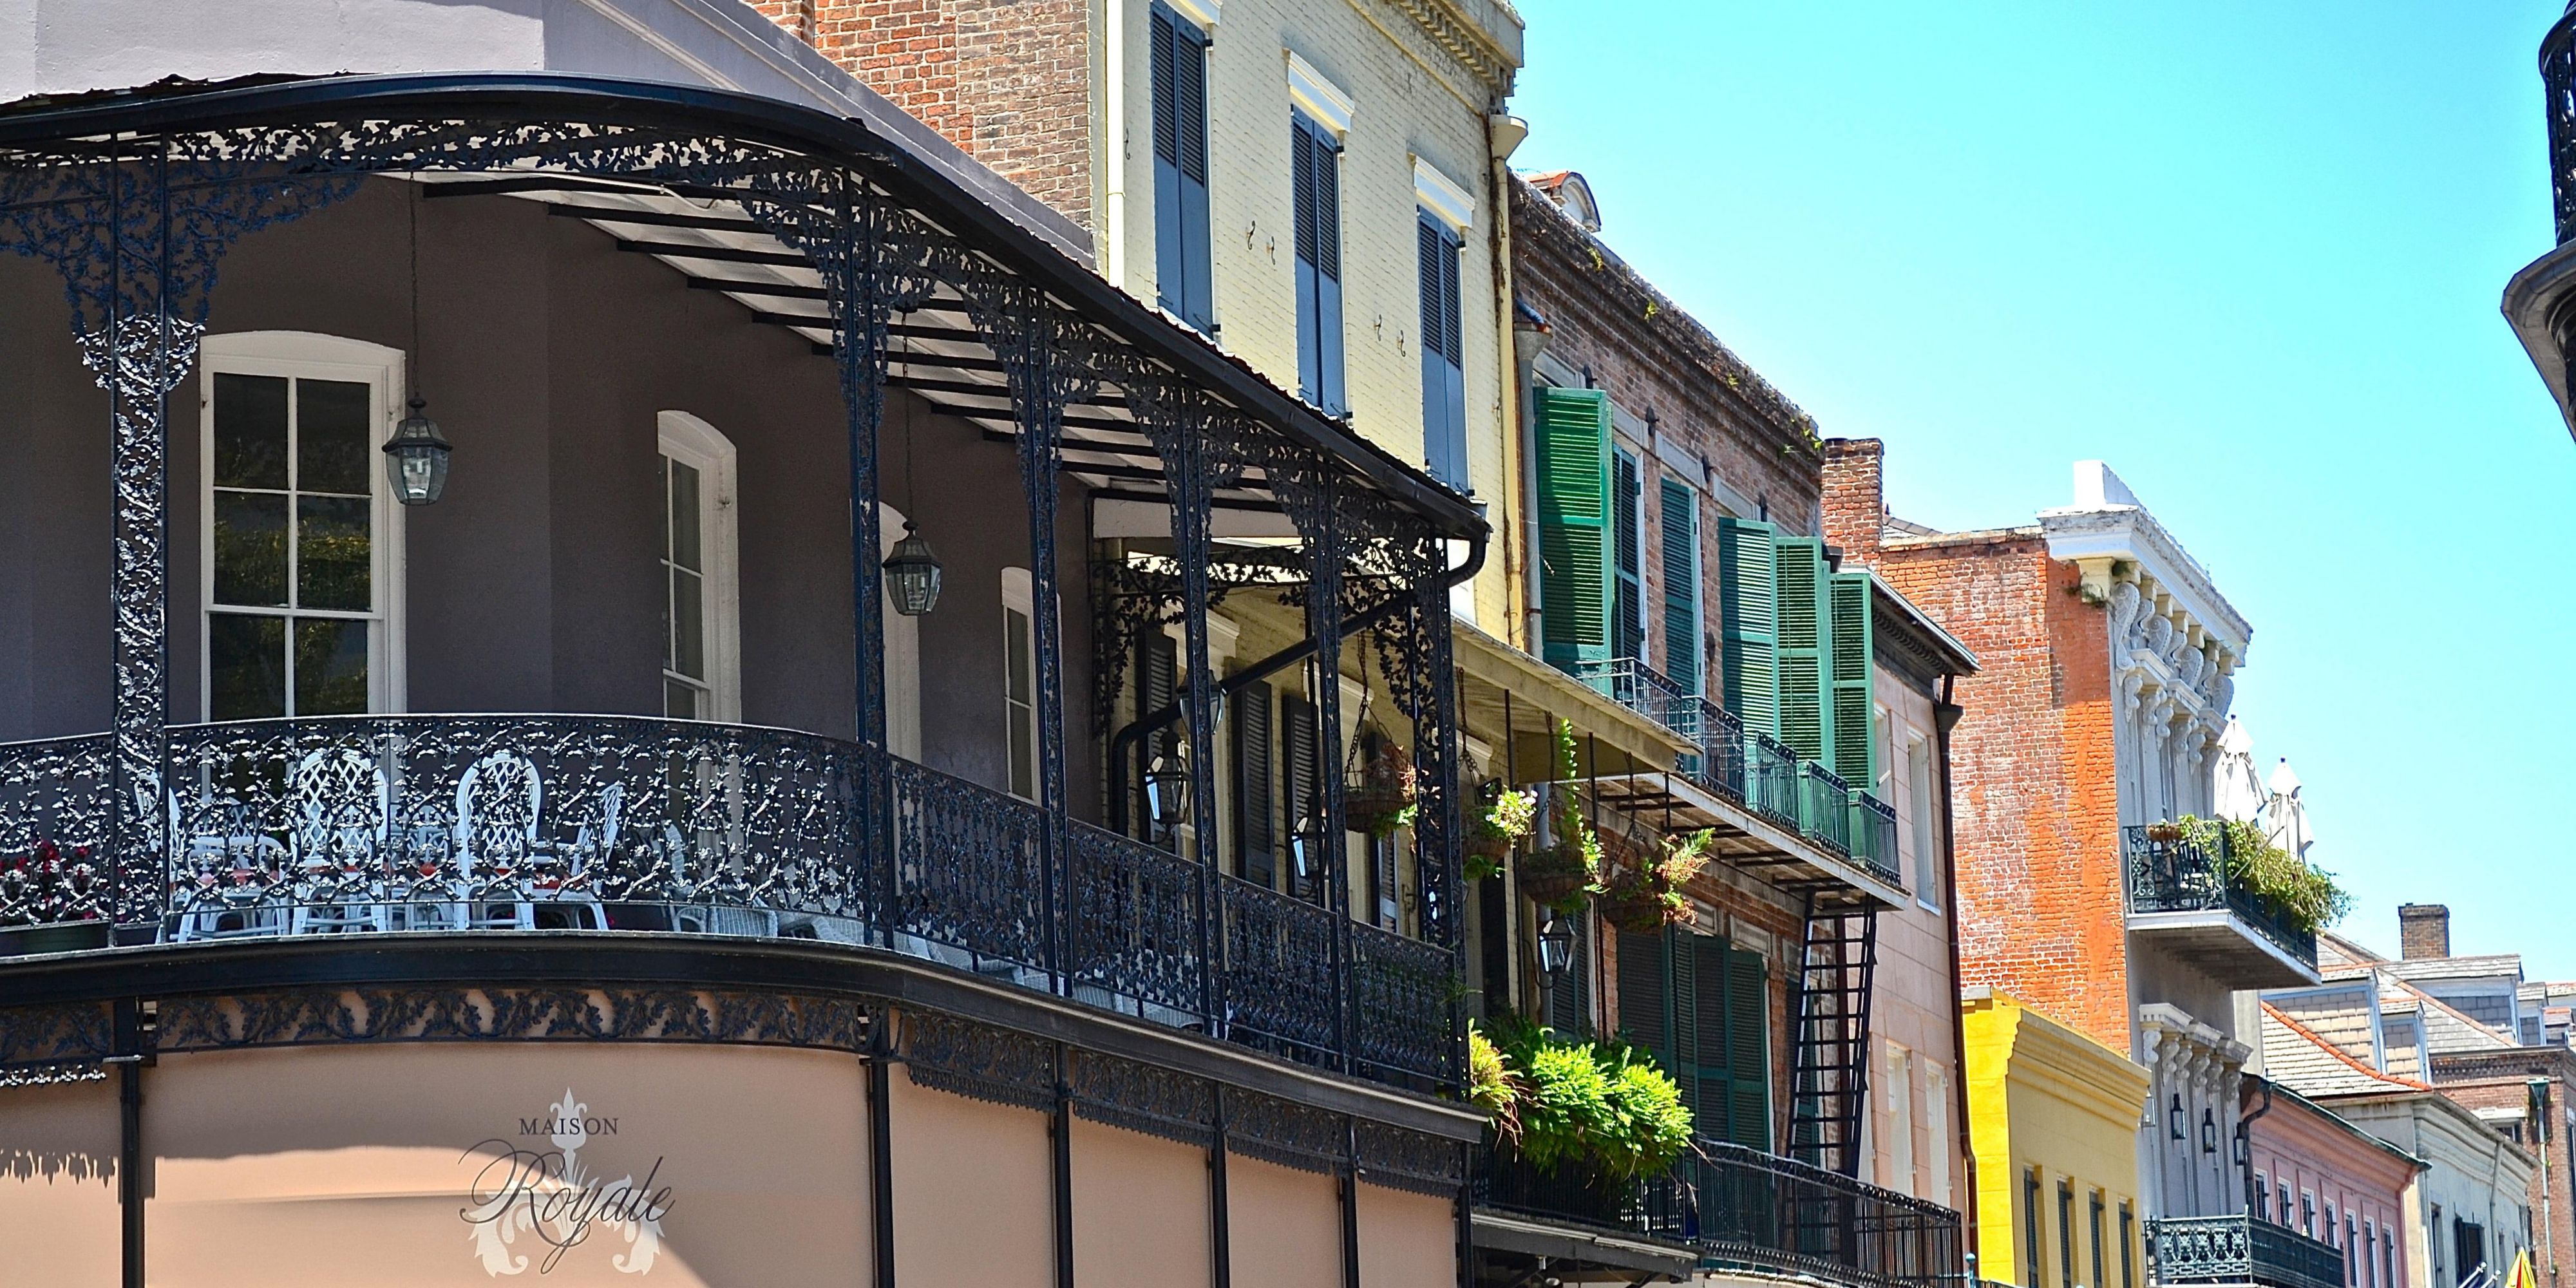 Often called the Crown Jewel of New Orleans, the French Quarter is one of NOLA's most historic neighborhoods. But you'll find plenty of new mixed in with the old. There’s a reimagined French Market, modern boutiques and artisan cocktails mix with beloved antique stores and old restaurants. 